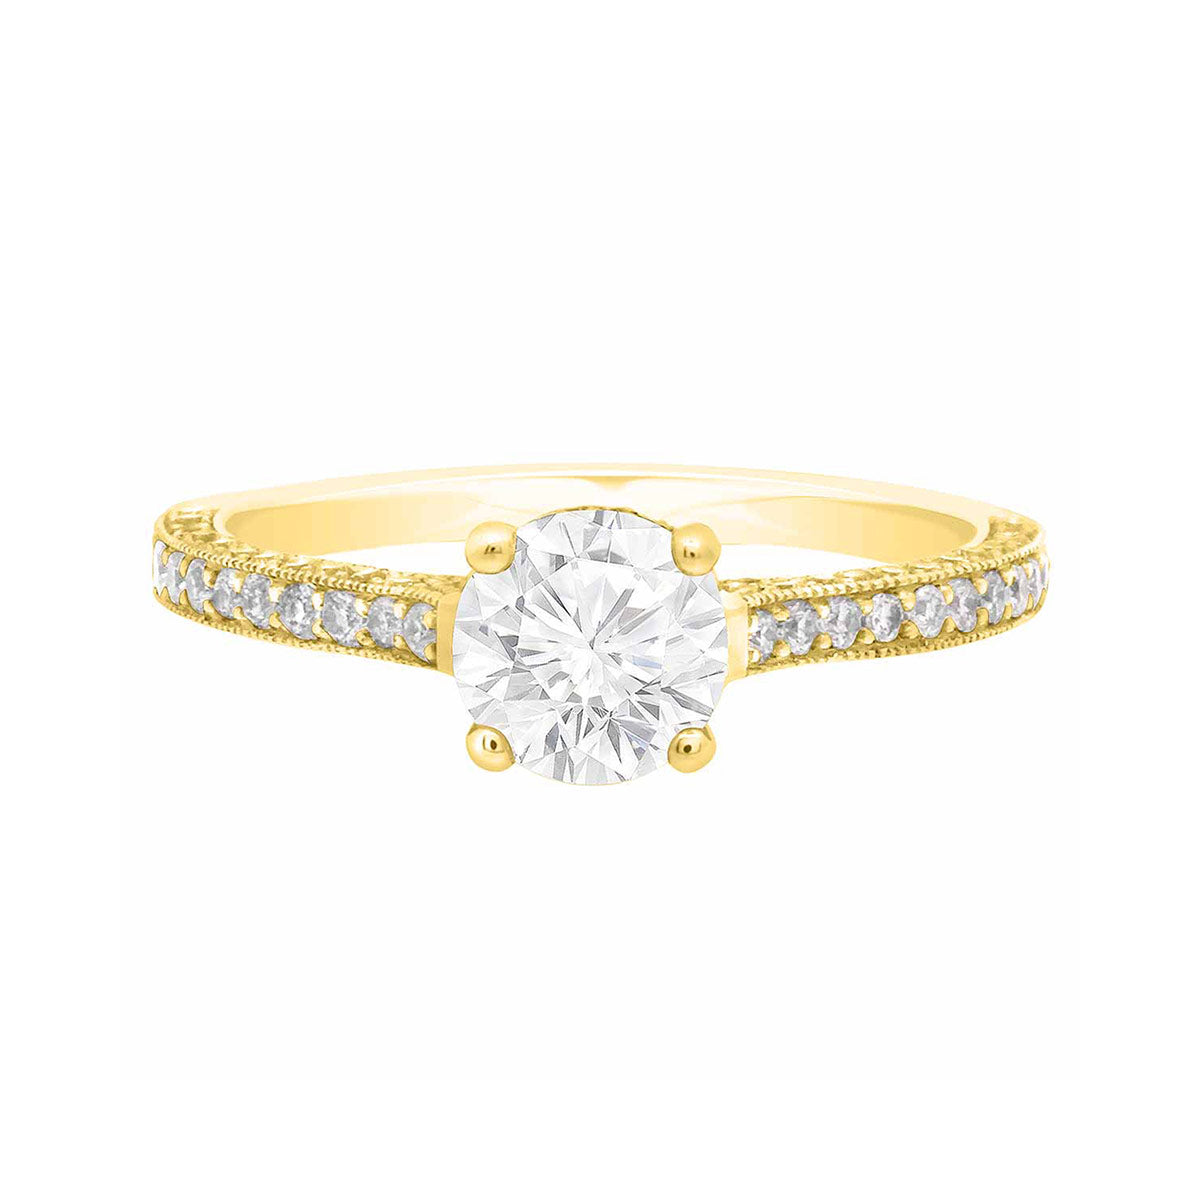 Thin Band Solitaire Ring with diamonds on sidewalls in yellow gold pictured laying flat on a white surface